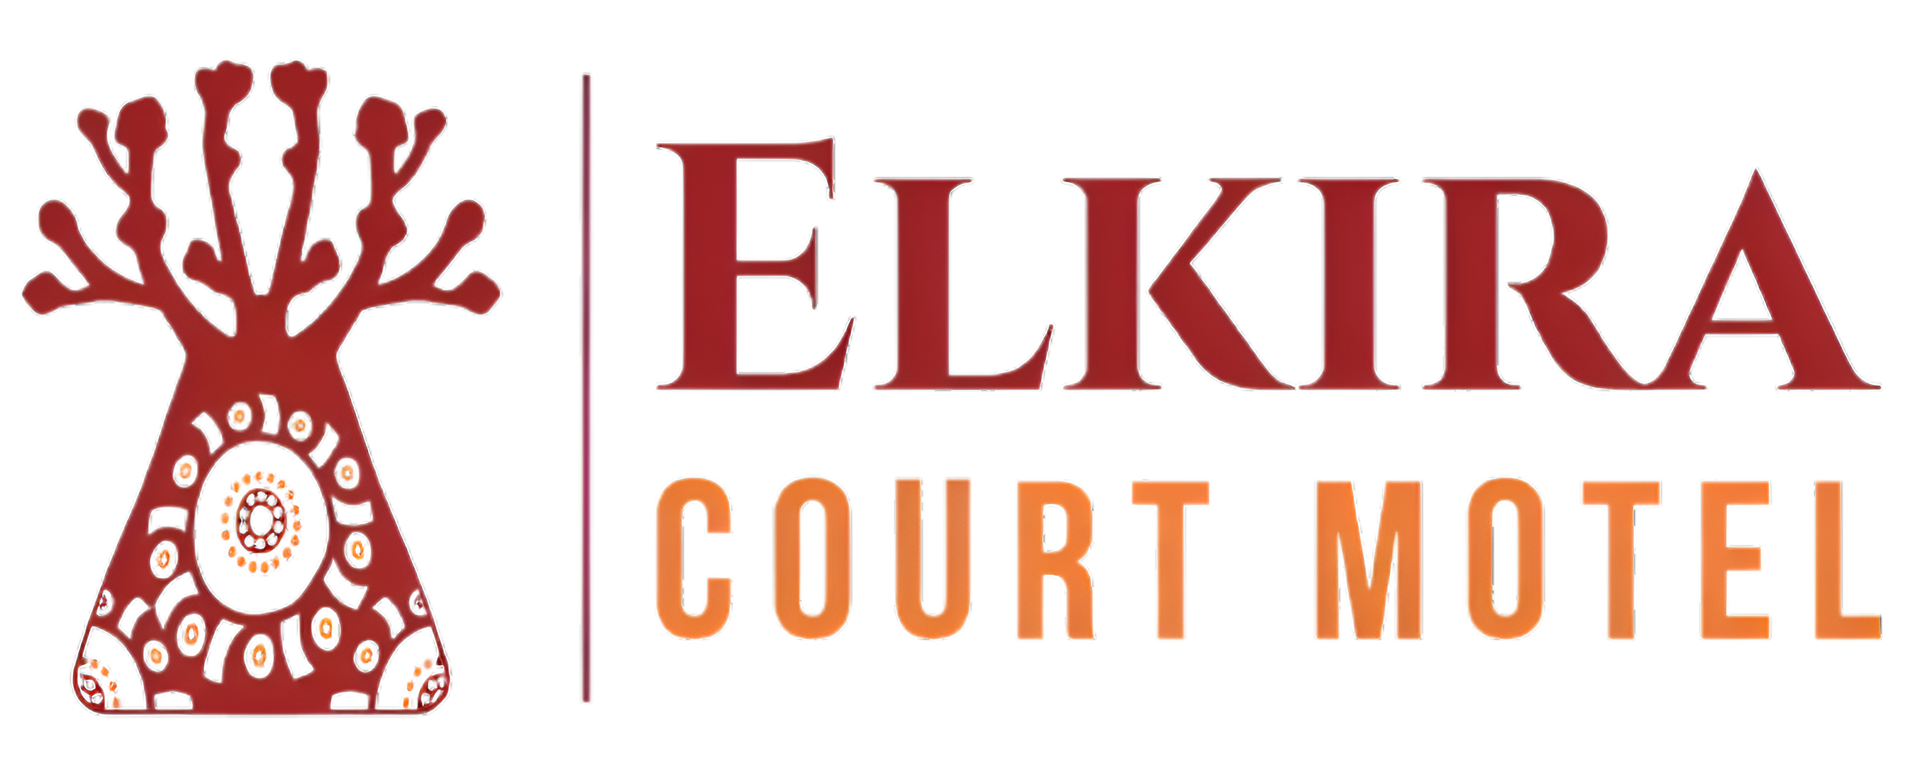 Accommodation in Alice Springs - Elkira Court Motel, Alice Springs, Northern Territory